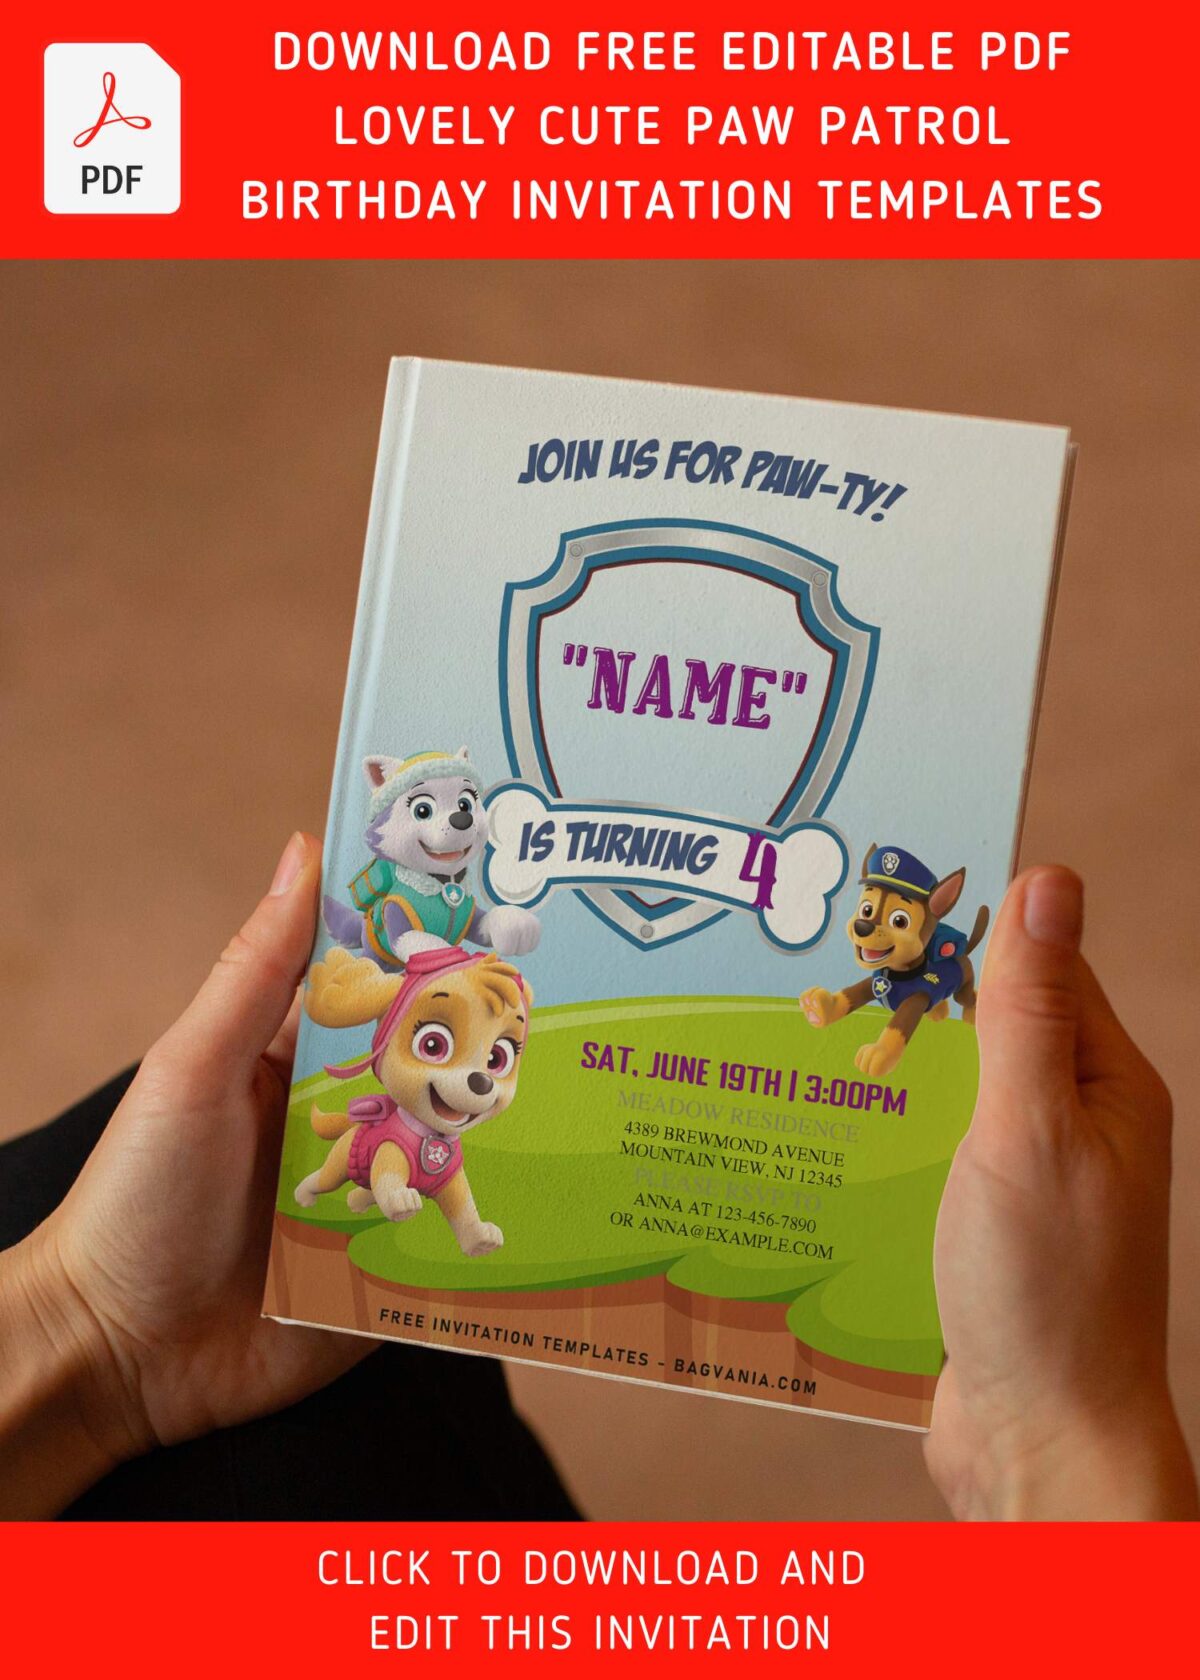 (Free Editable PDF) Lovely Cute Paw Patrol Kids Birthday Invitation Templates with adorable Everest